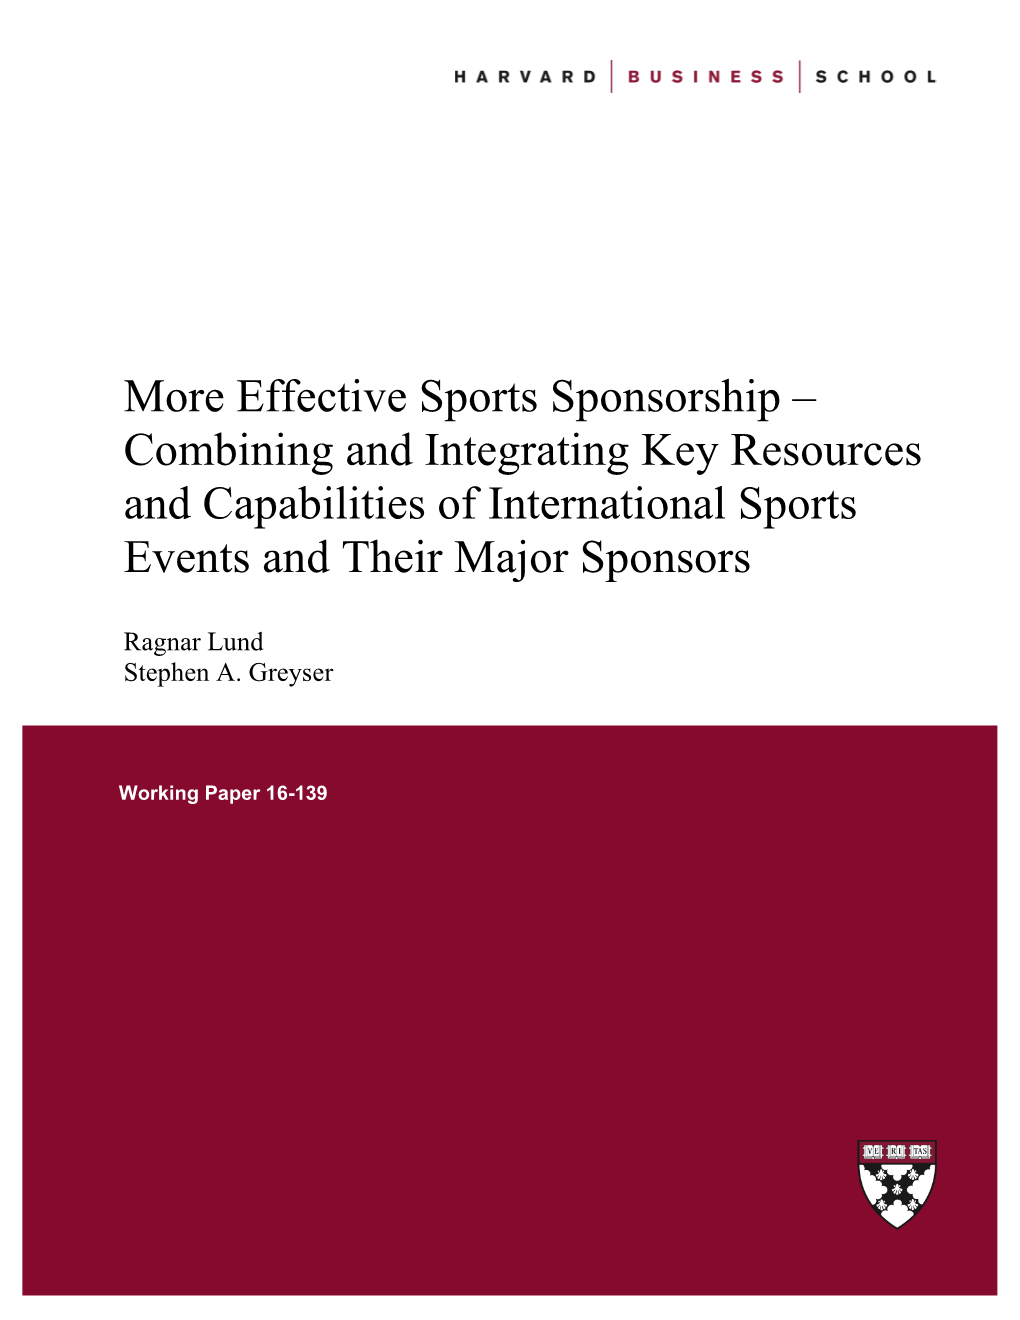 More Effective Sports Sponsorship—Combining and Integrating Key